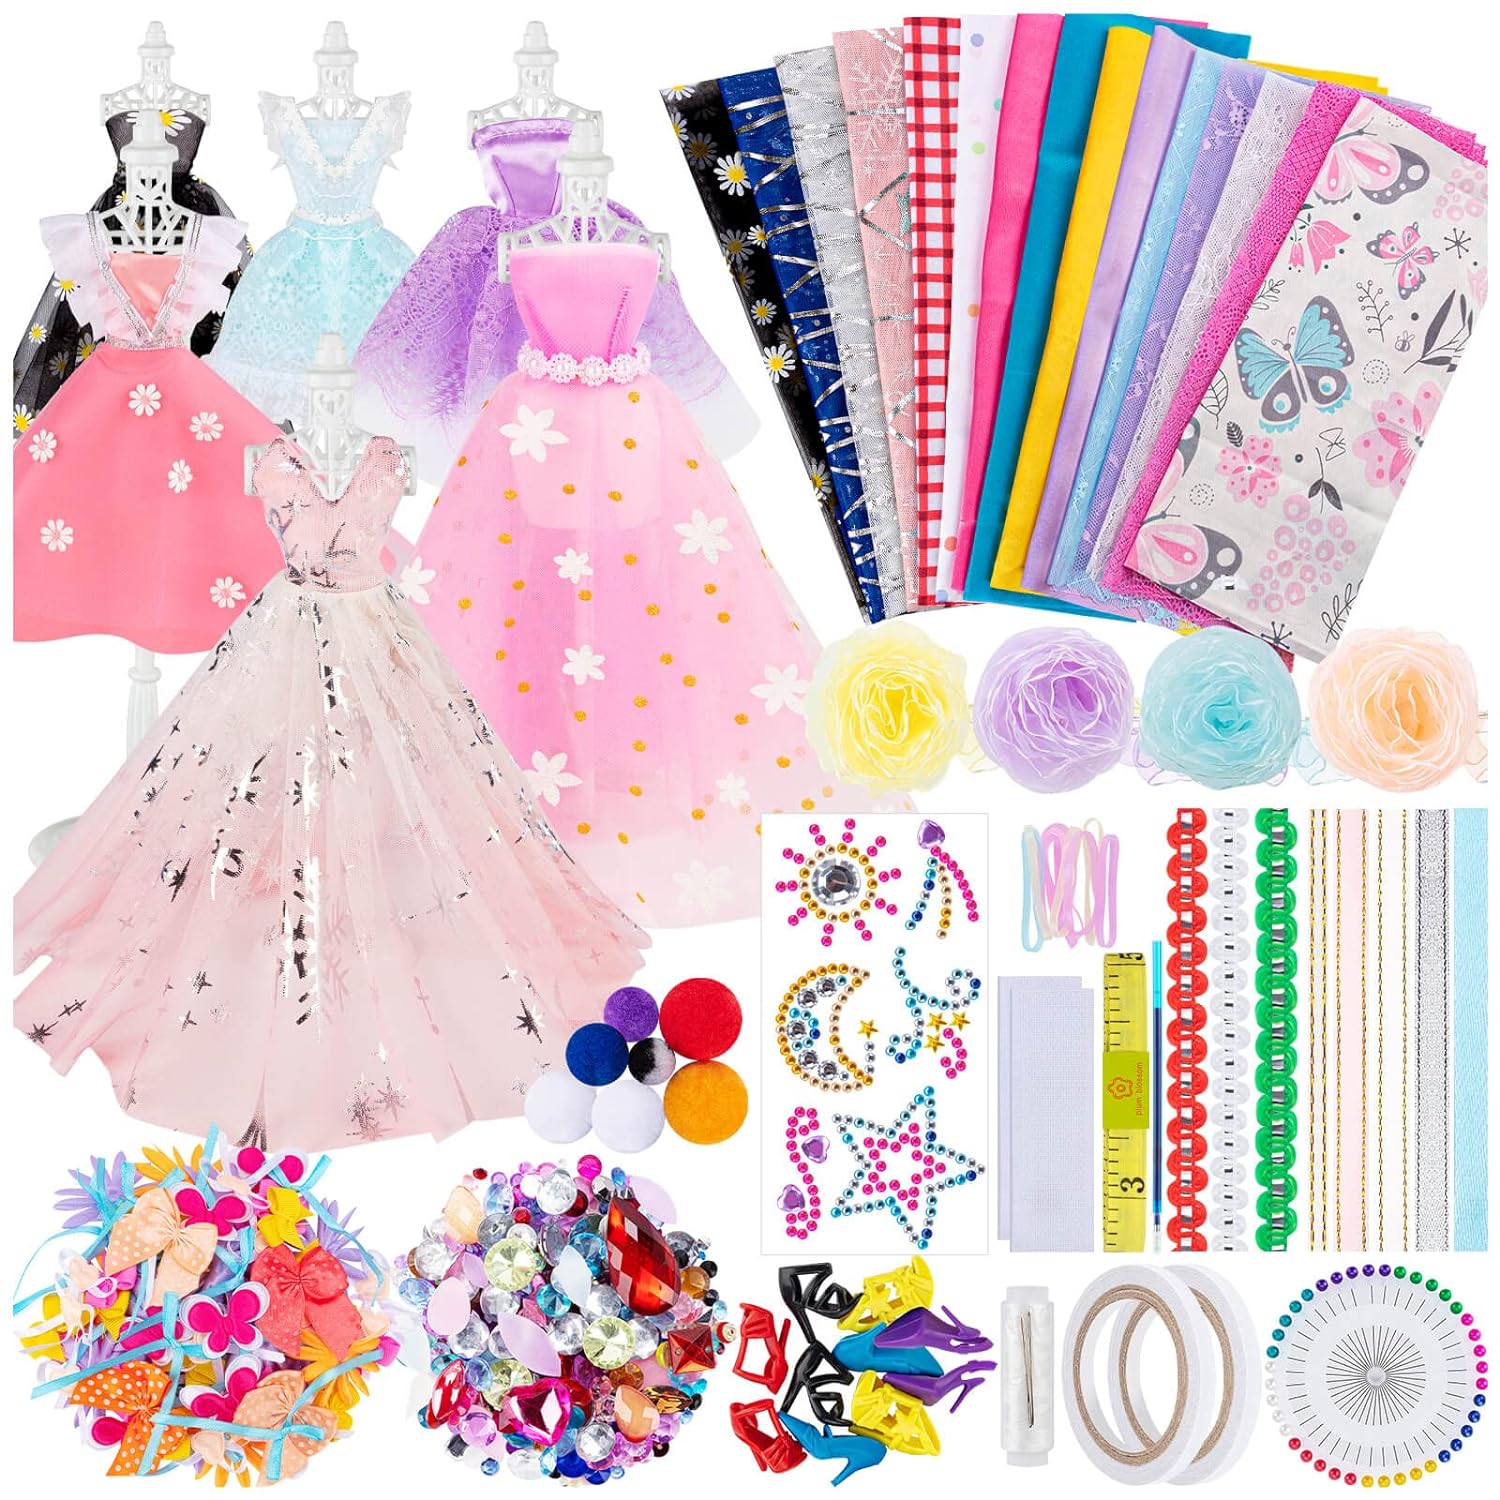 Great Choice Products Fashion Designer Kits for Girls, Fashion Design Games and Creativity DIY Toys with Mannequins, All in One Box Doll Clothes